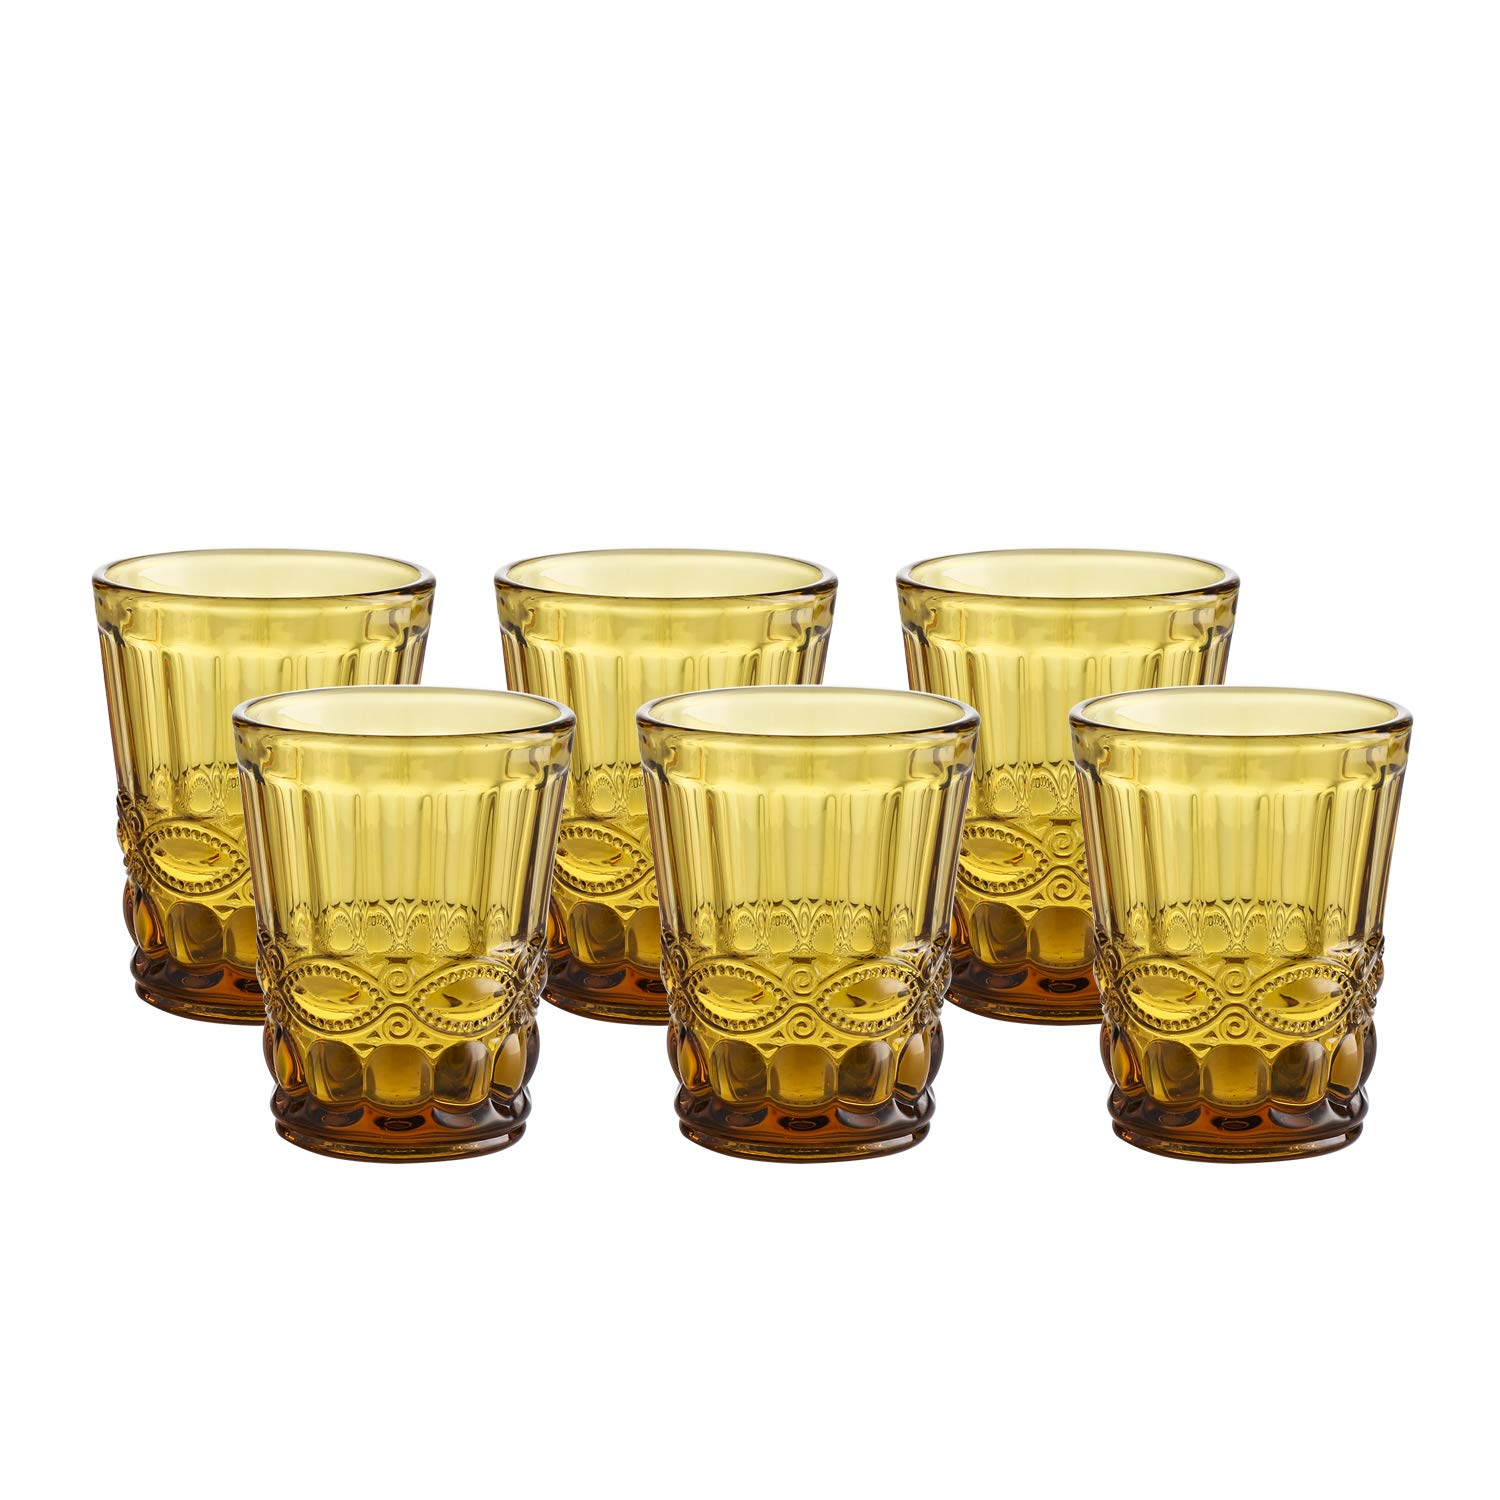 WHOLE HOUSEWARES | Amber Glassware Vintage-Pressed Pattern Set of 6 | 8 oz Embossed Design | Amber Drinking Glasses | For Weddings, Dinners, and Parties | Amber Glasses Drinking